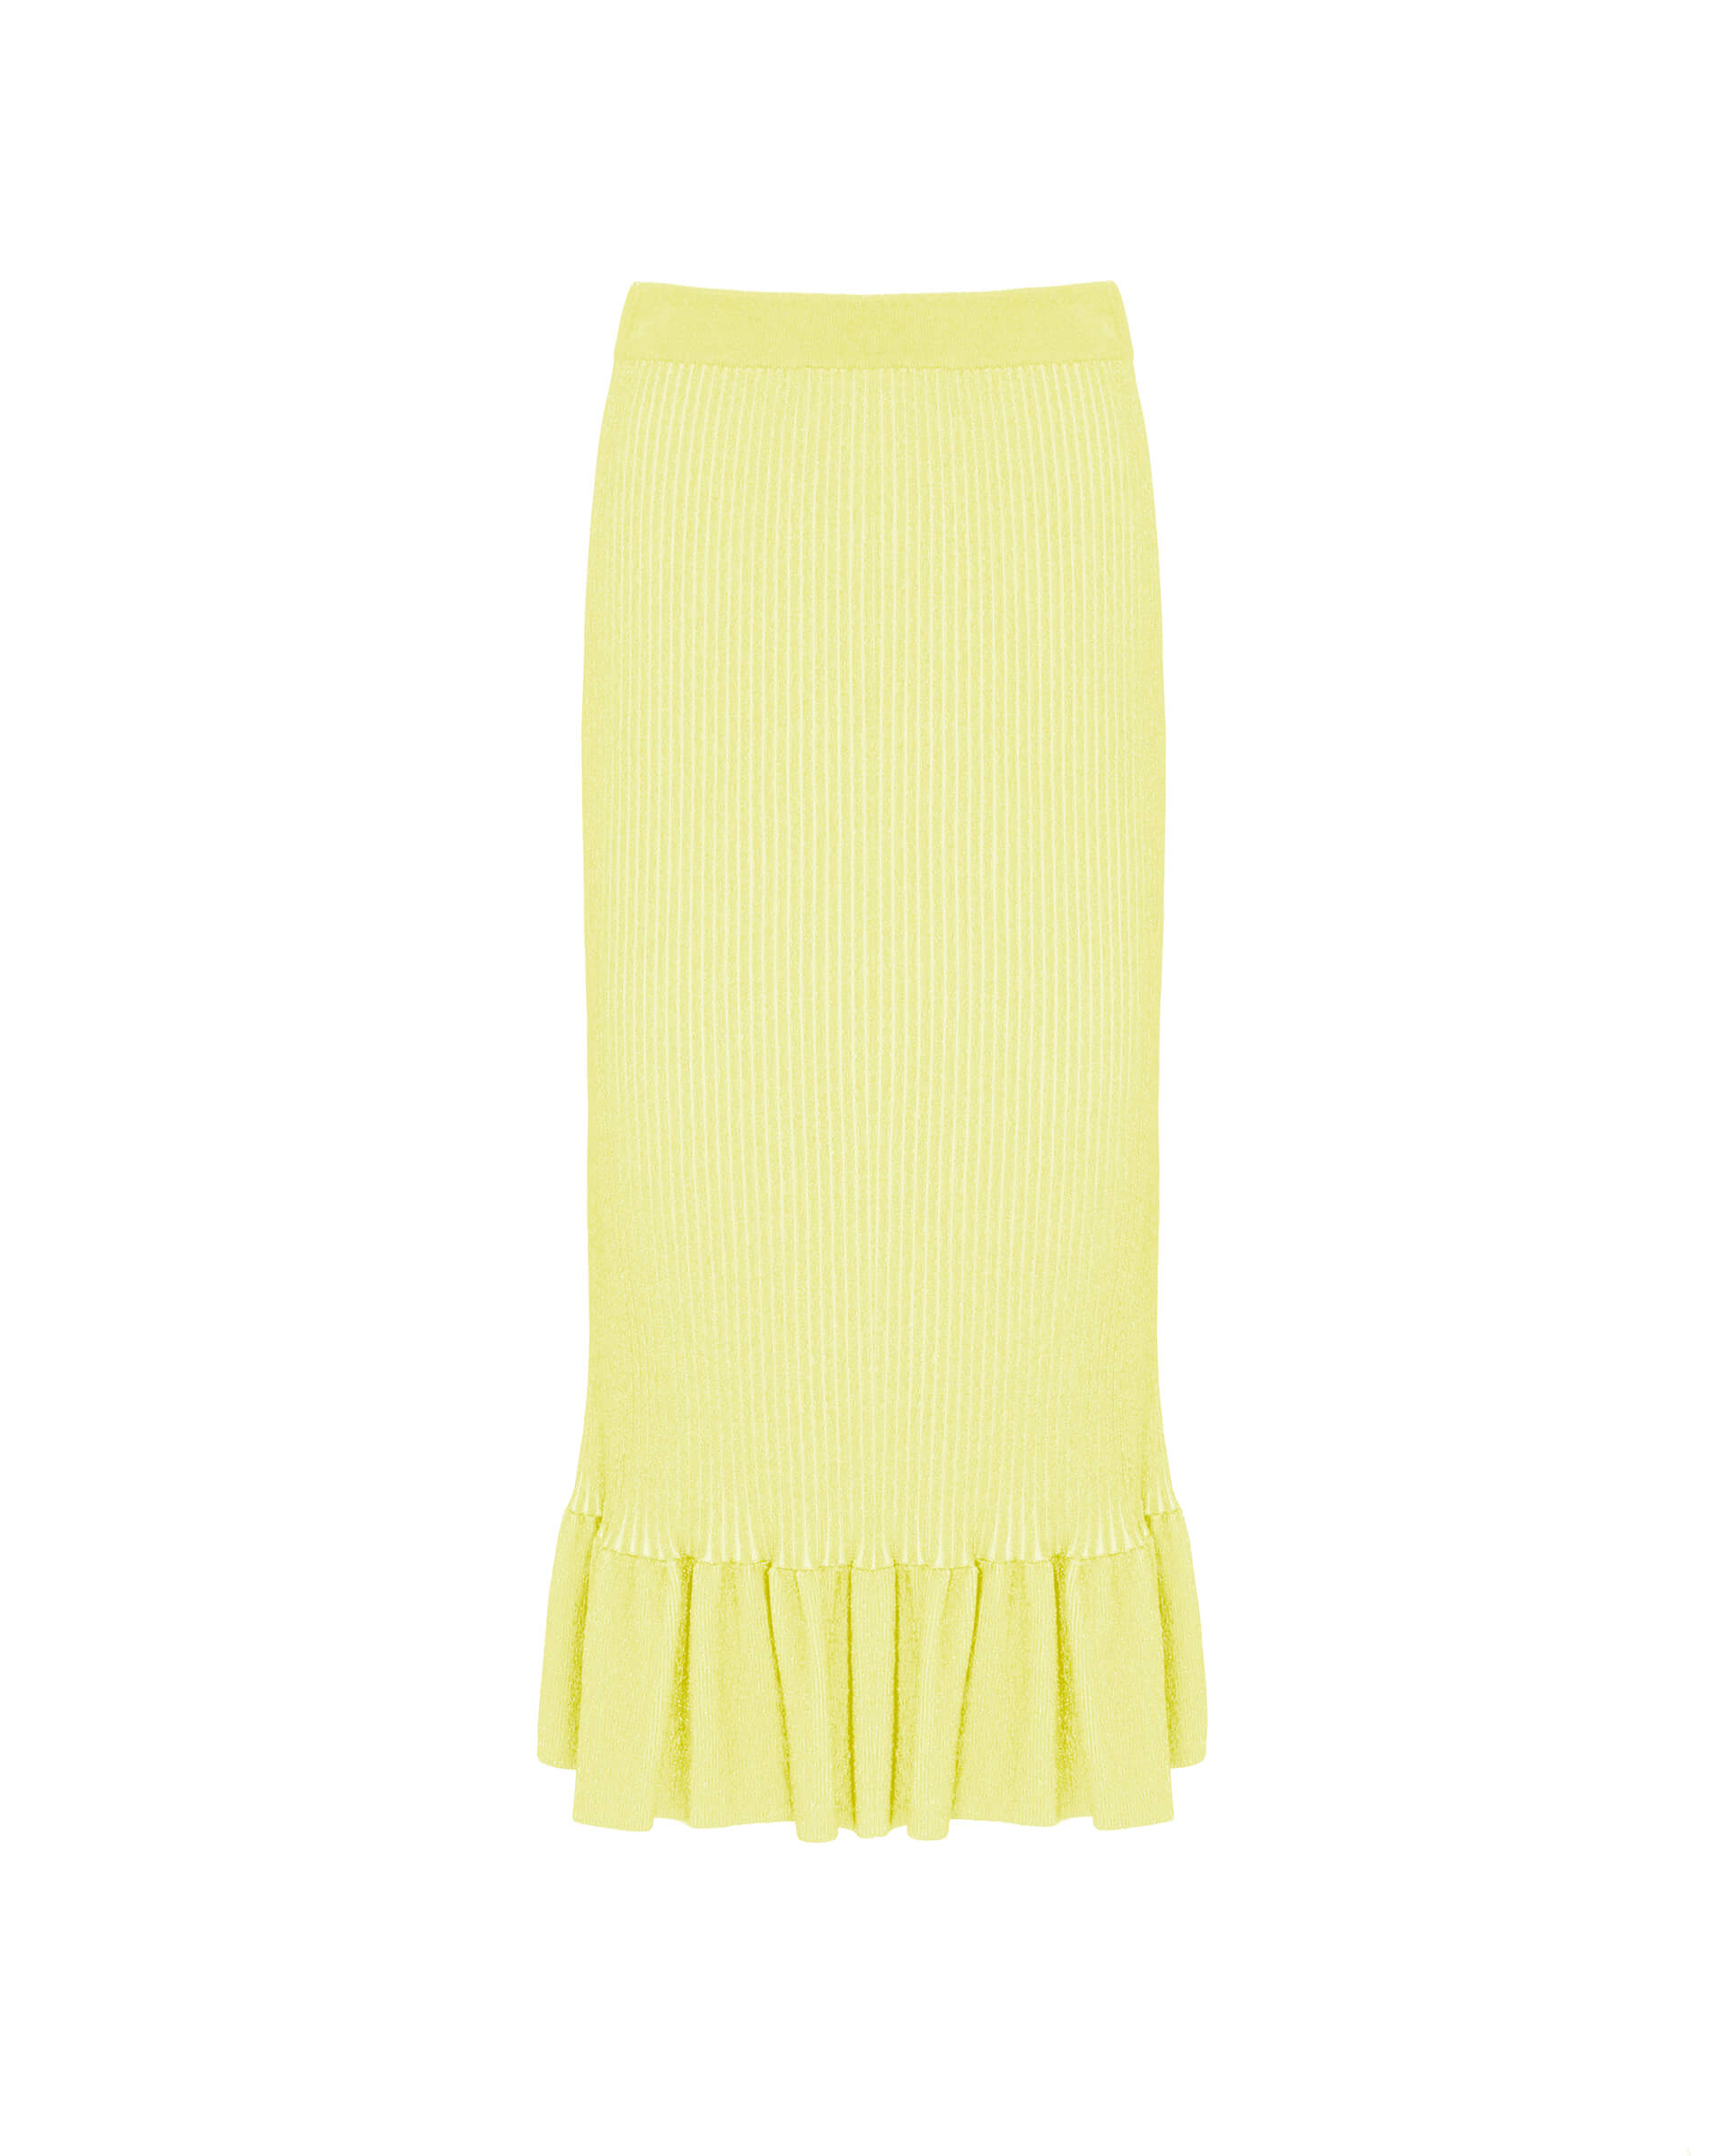 skirt in knitted vanisè with flounce